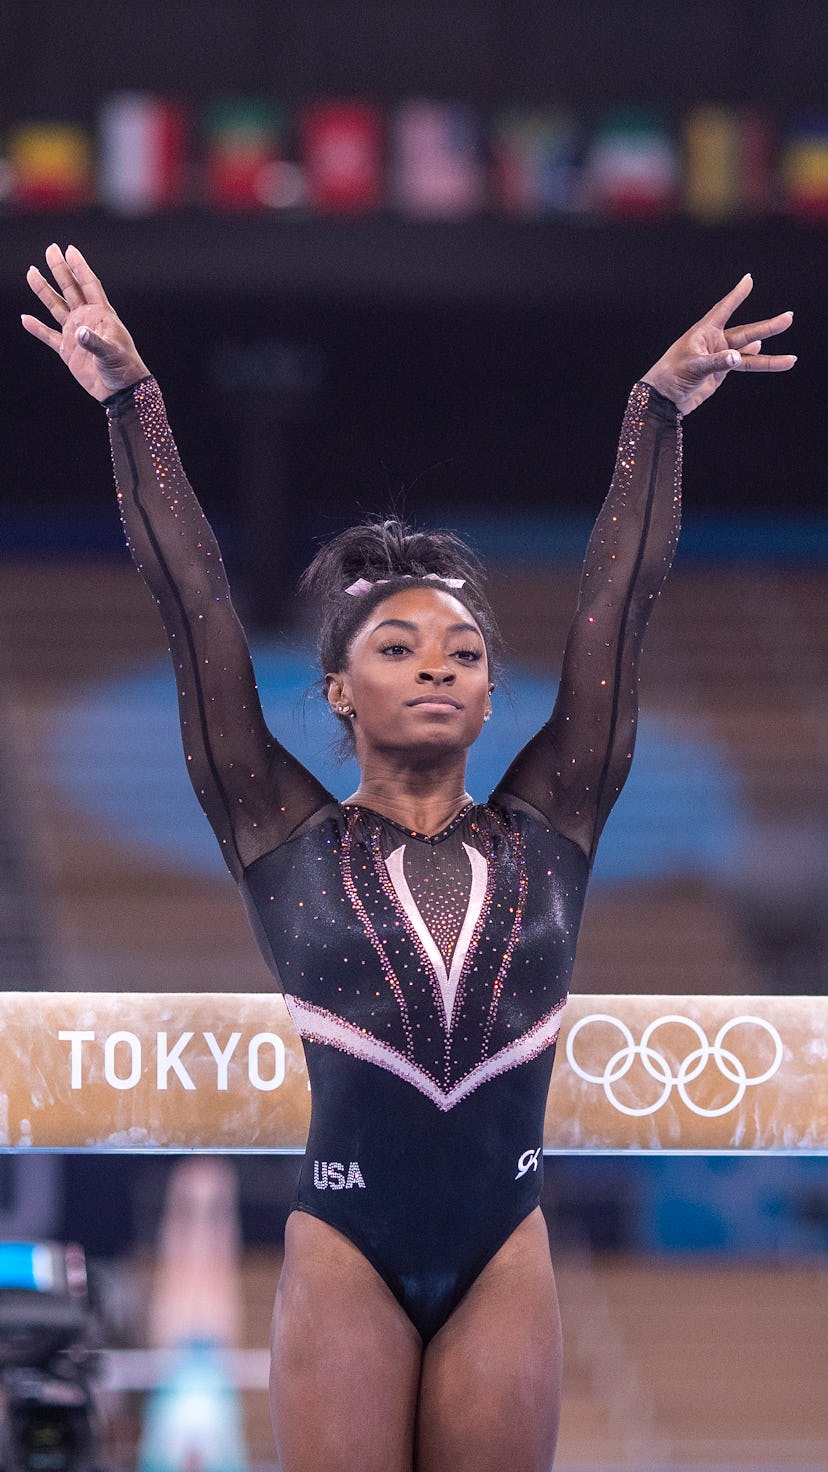 As Simone Biles prepares for the Tokyo Olympics, it’s the perfect time to take a look back at some o...